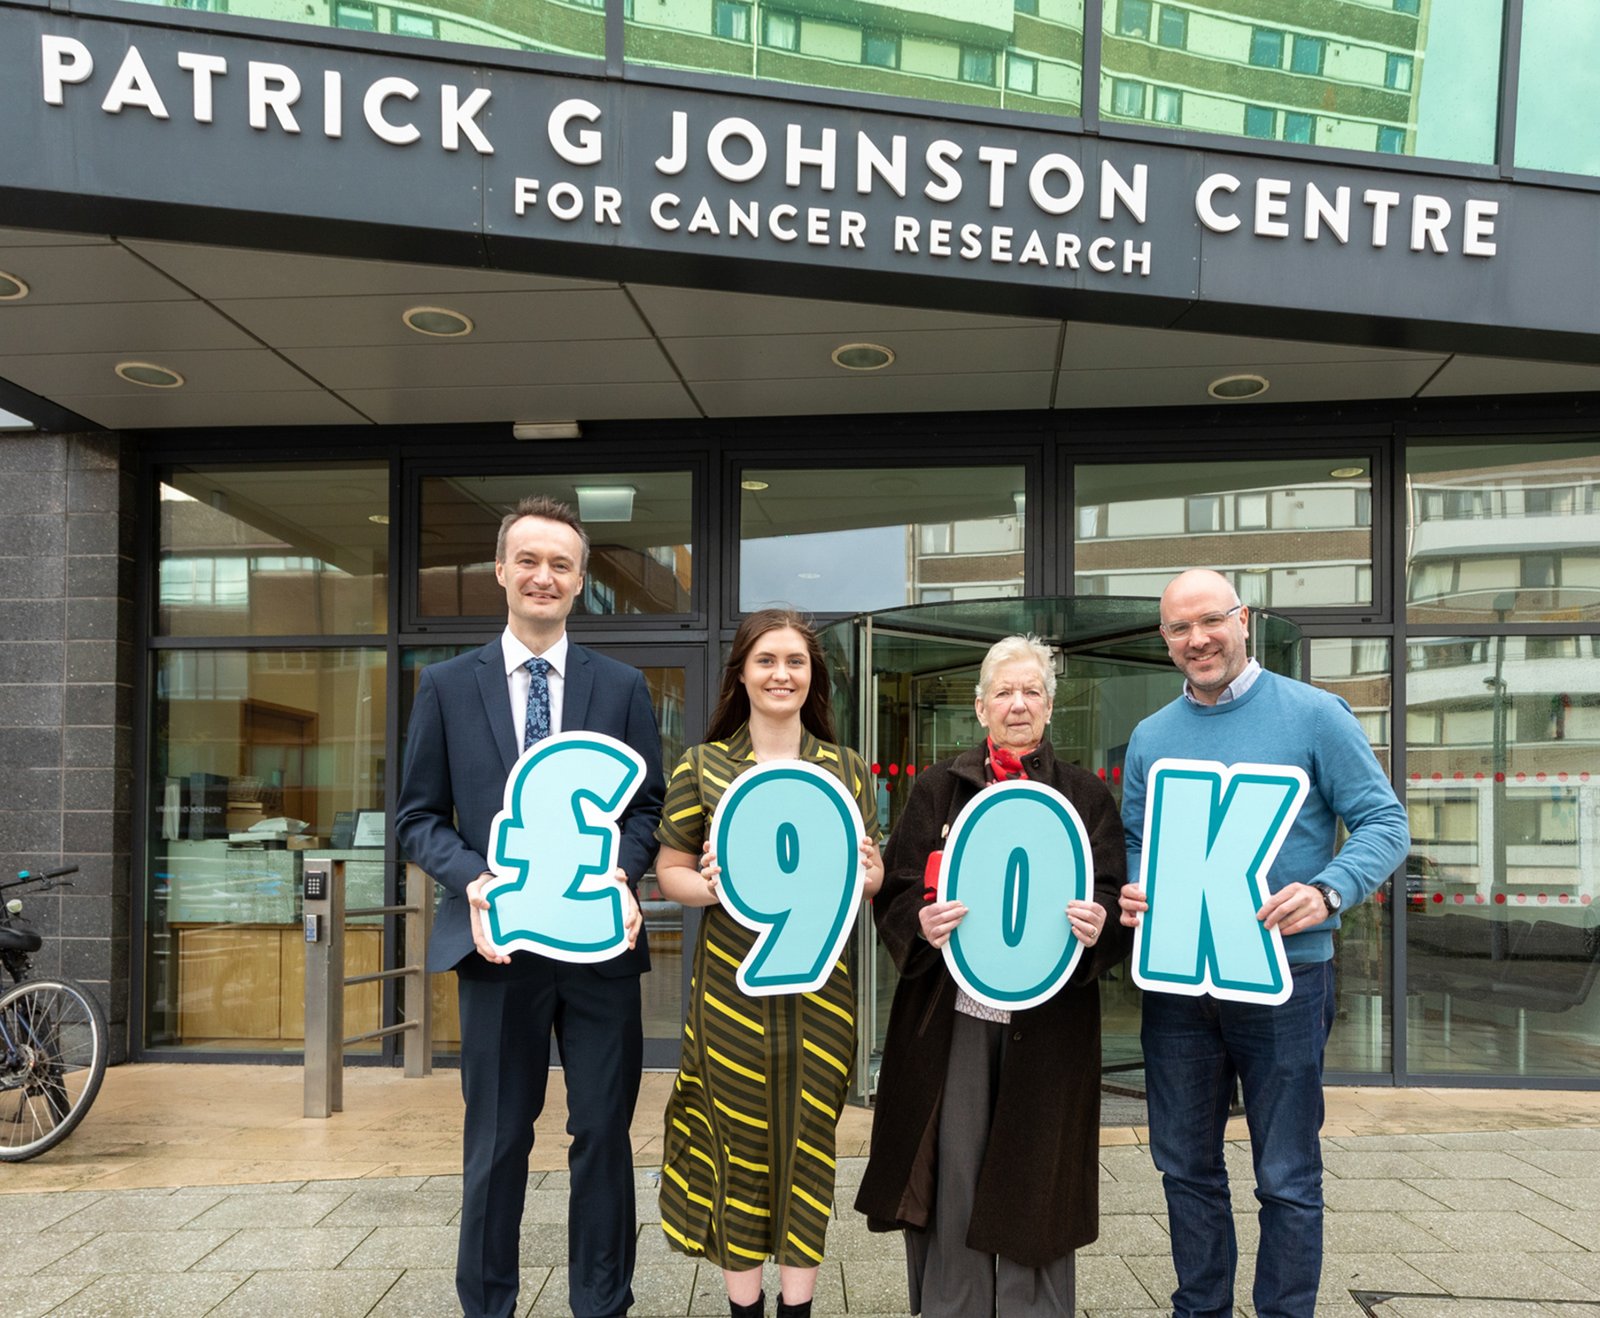 Susie Kennedy receives the Dr Jim Birnie Fellowship to study immunotherapy in oesophageal cancer, thanks to a £90k donation from the Birnie family to Cancer Focus NI. Pictured left to right: Research supervisor Dr Richard Turkington, Susie Kennedy, Ruth Birnie and Chief Executive of Cancer Focus NI, Richard Spratt.